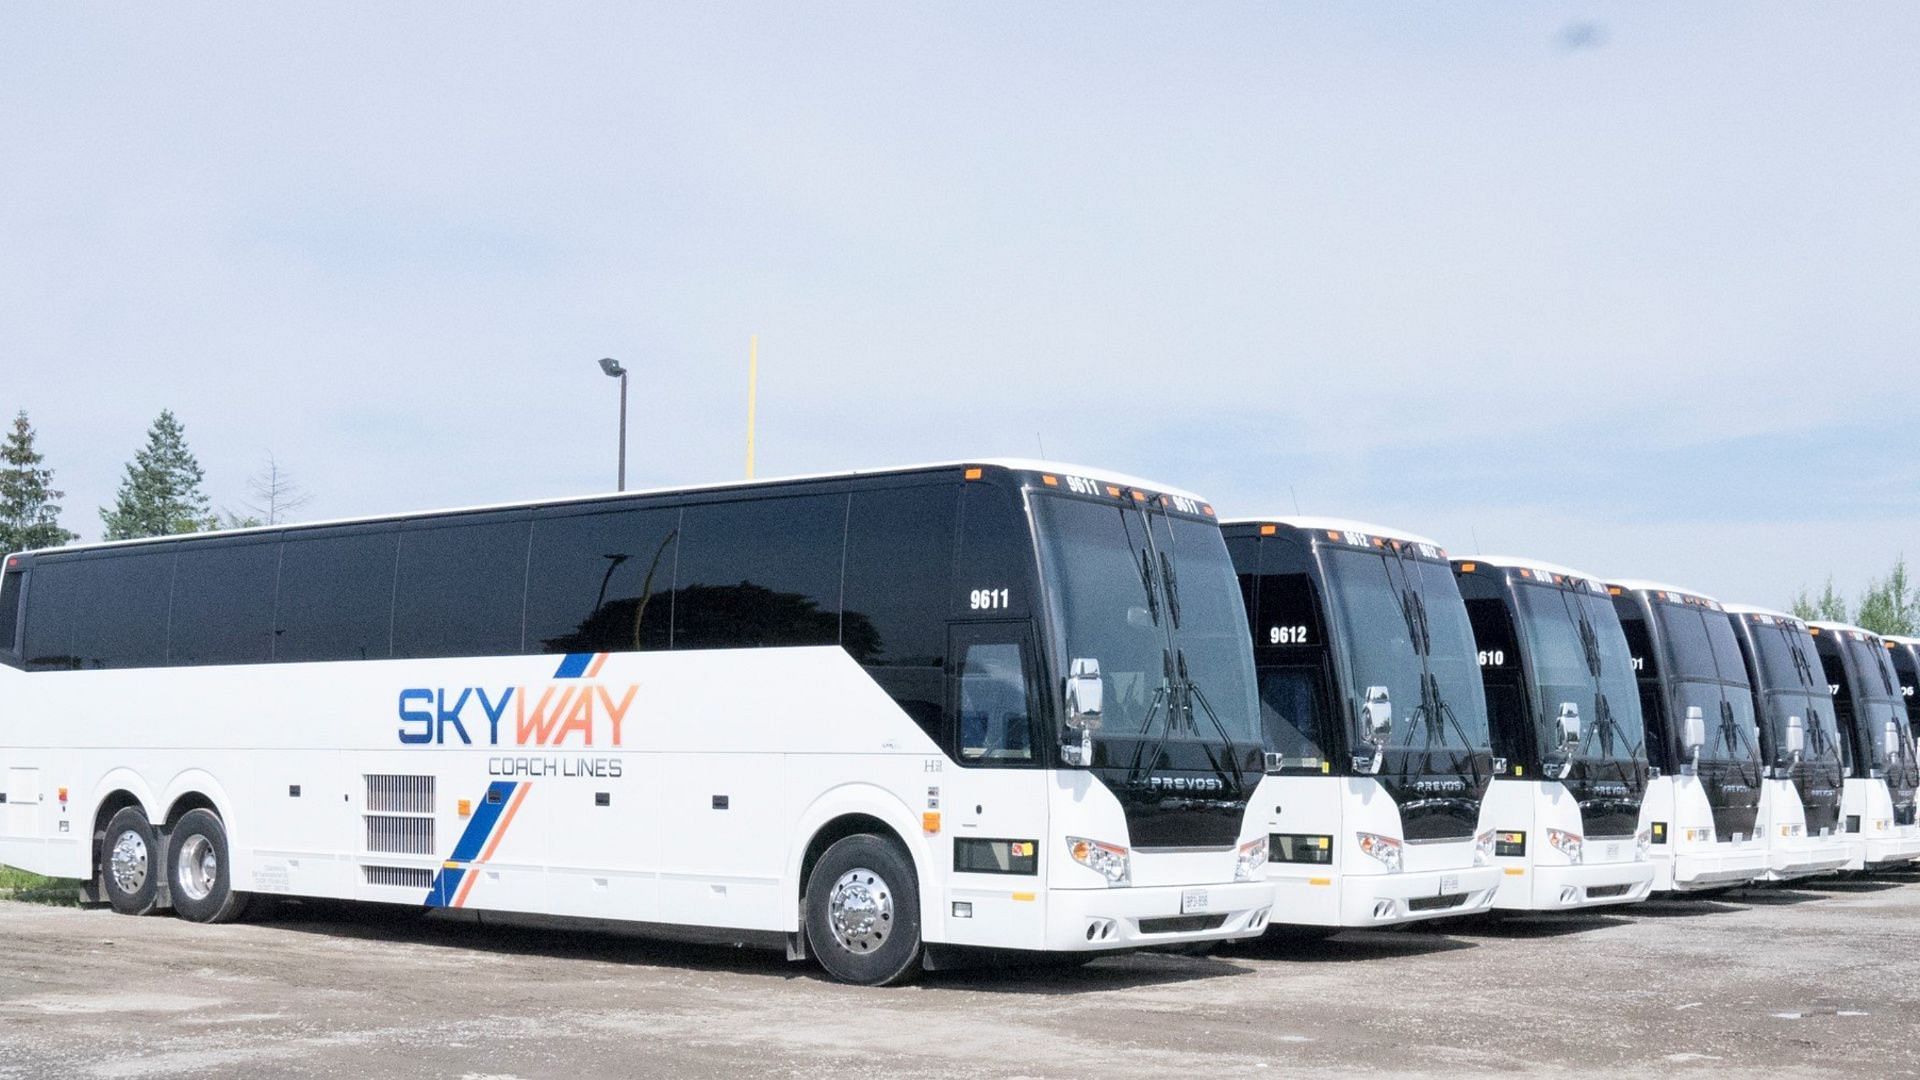 The incident involving the Skyway Coach Line bus caused injuries to several passengers (Image via Facebook / Skyway Coach Lines)